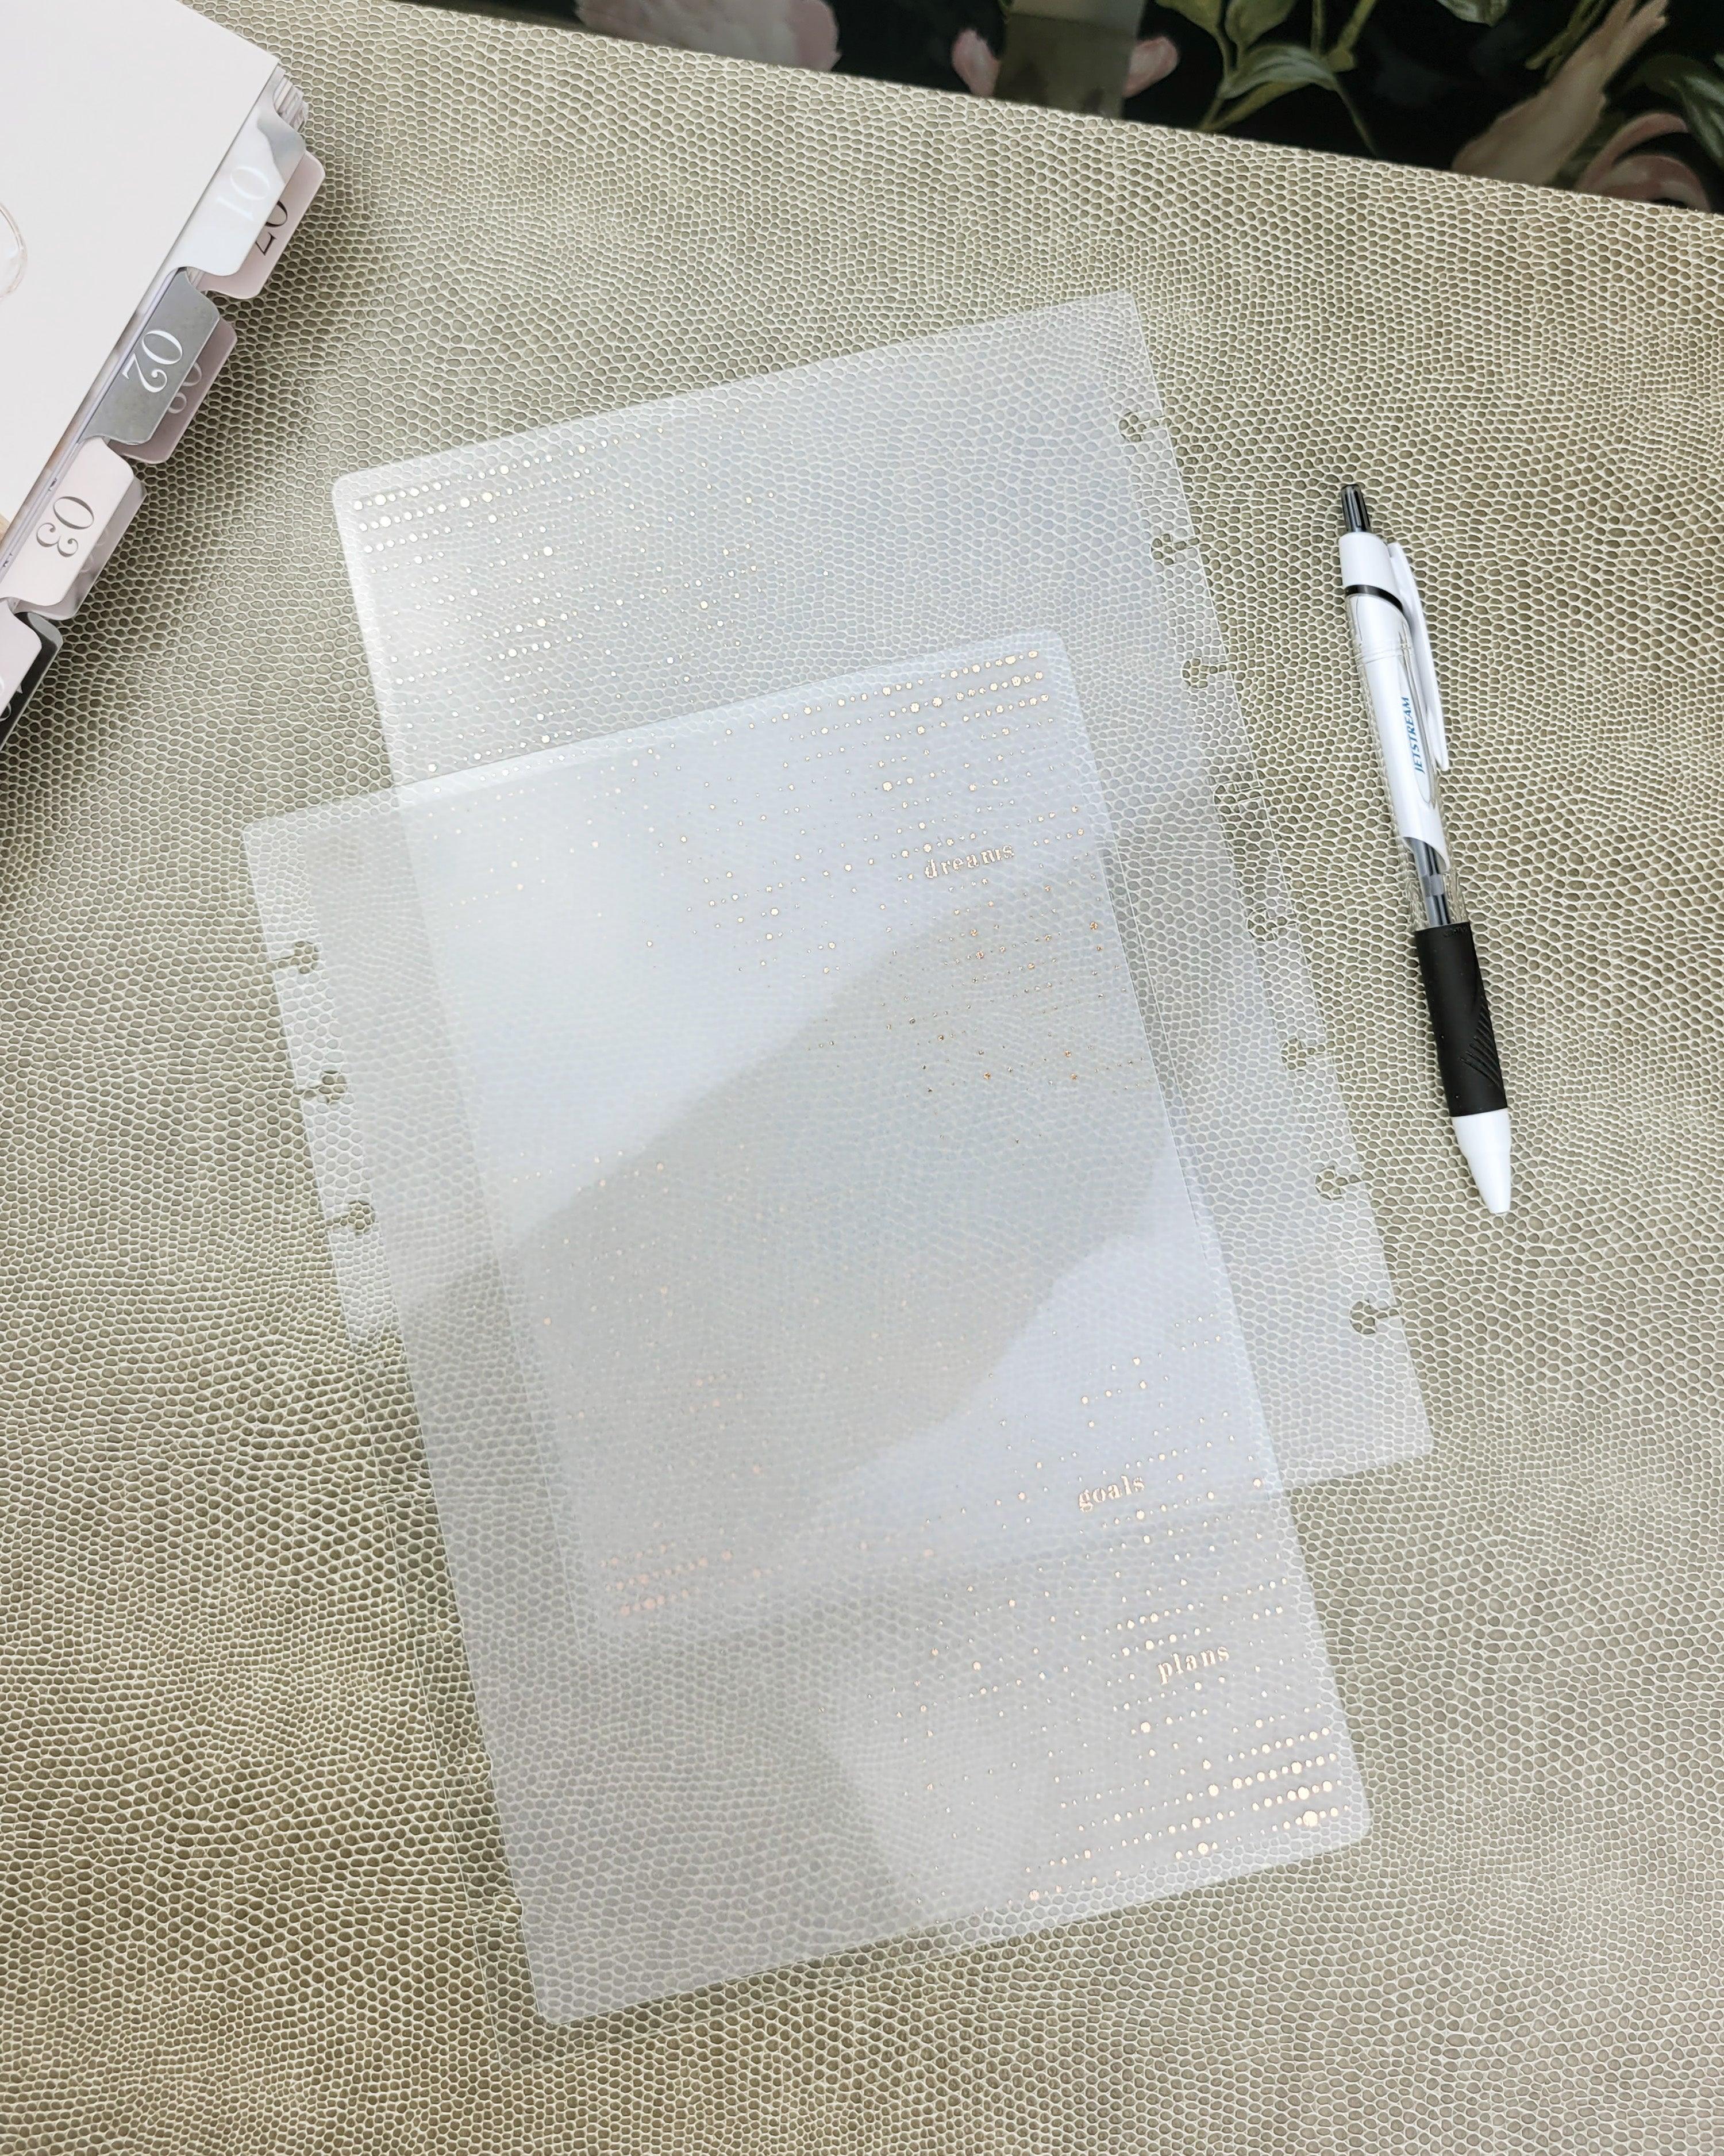 Vellum translucent planner cover for discbound planner binding systems by Jane's agenda.